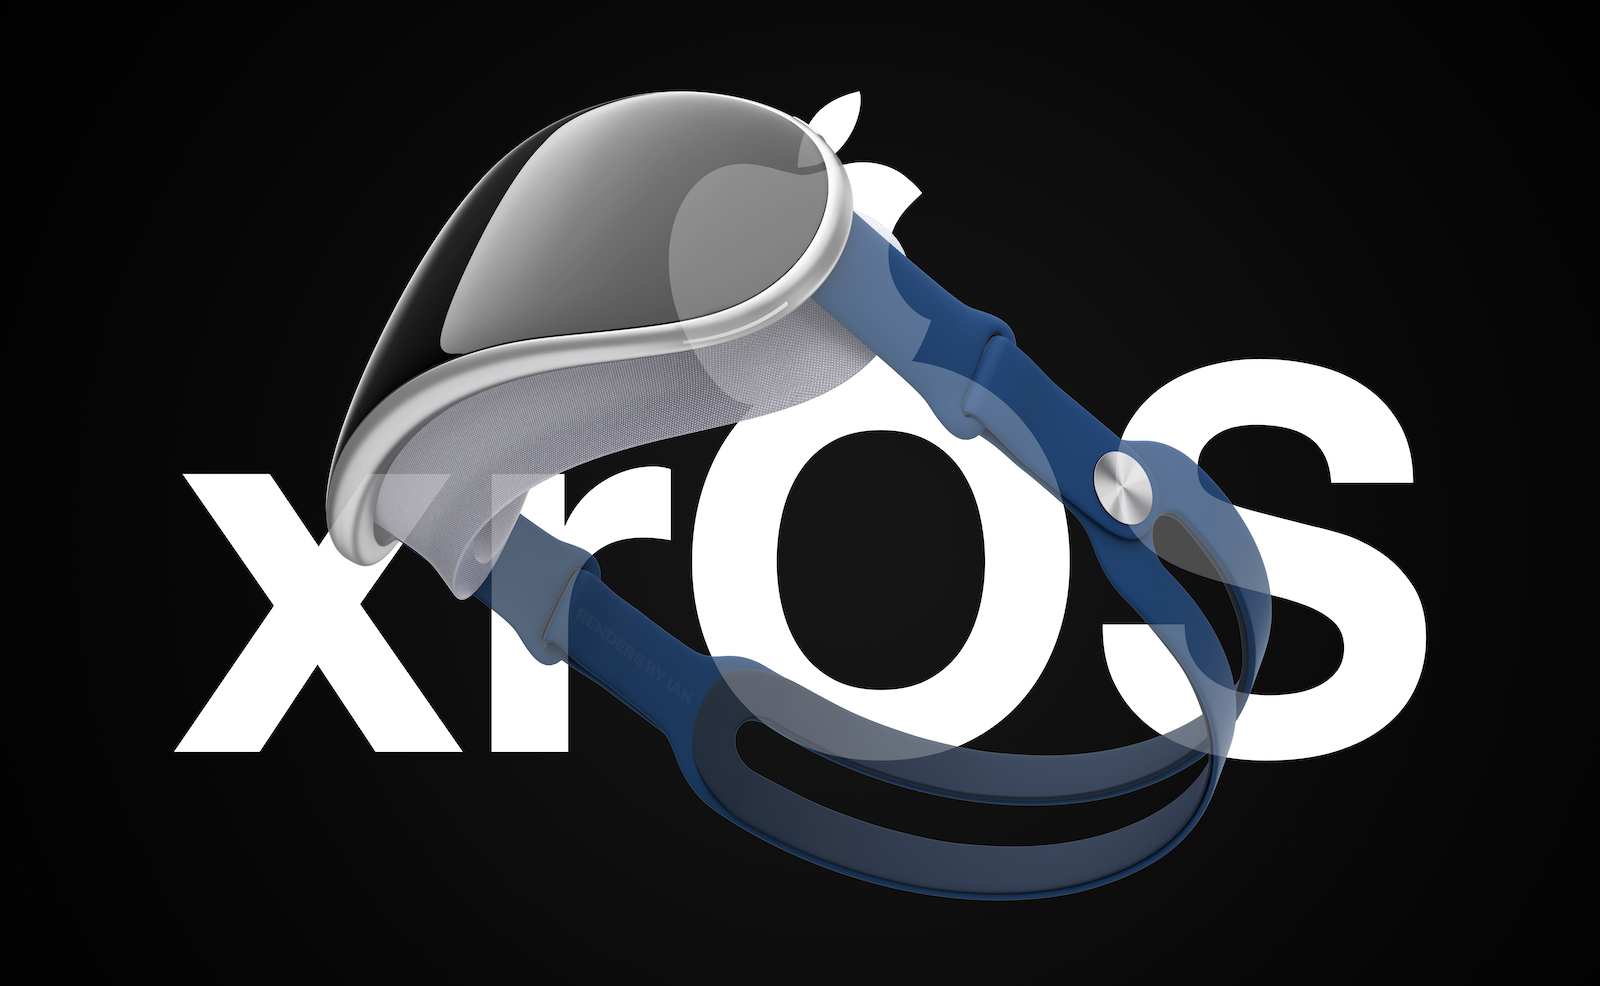 XrOS for Reality Pro Apple headset